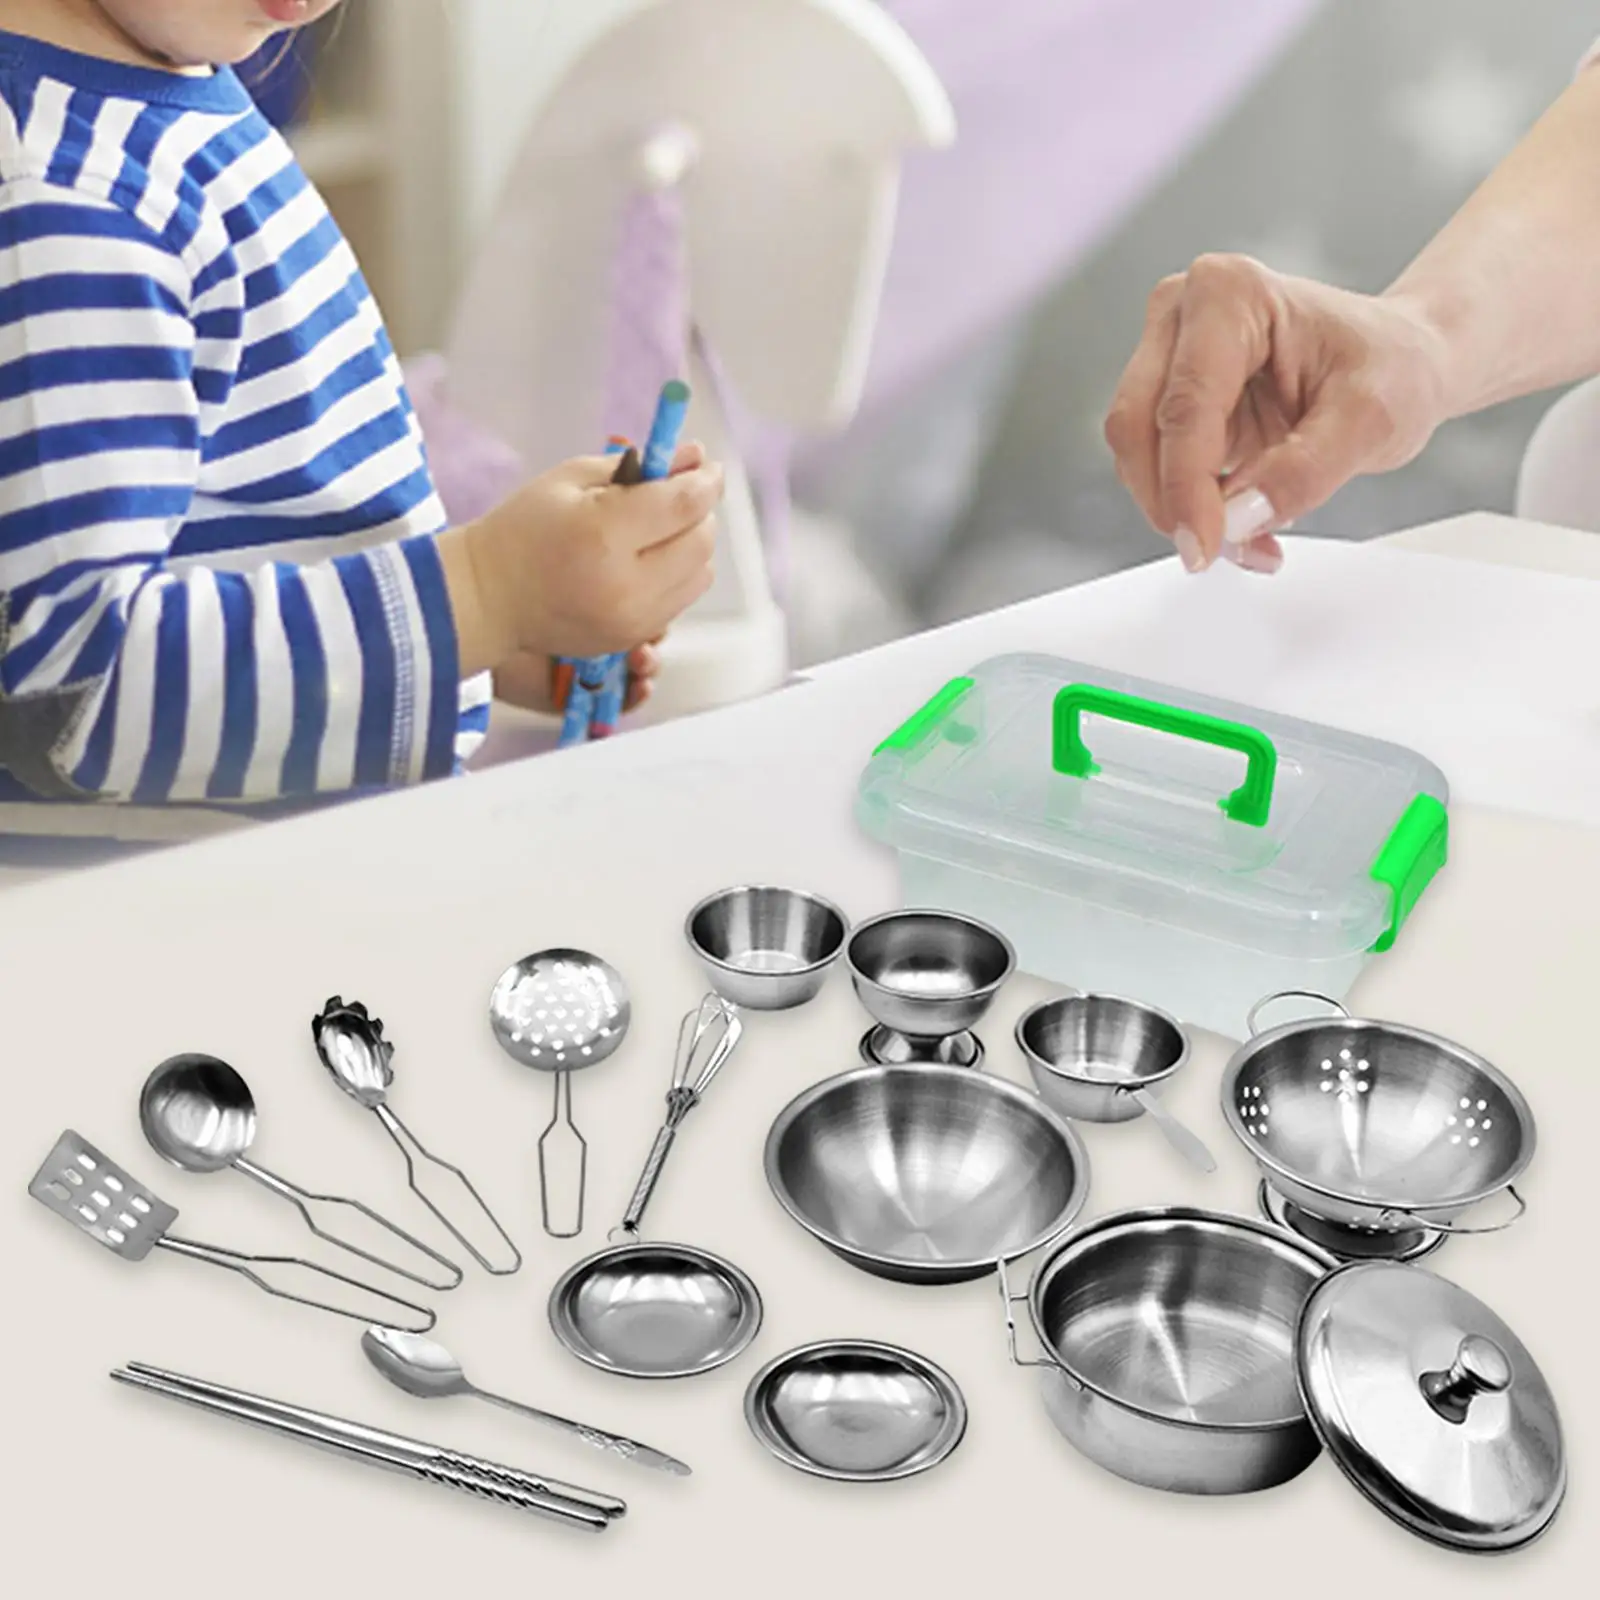 

17x Kids Play Pots and Utensils Playset Pretend Play Kitchen Toys Cookware for Boys Girls Ages 3+ Years Old Children Party Favor